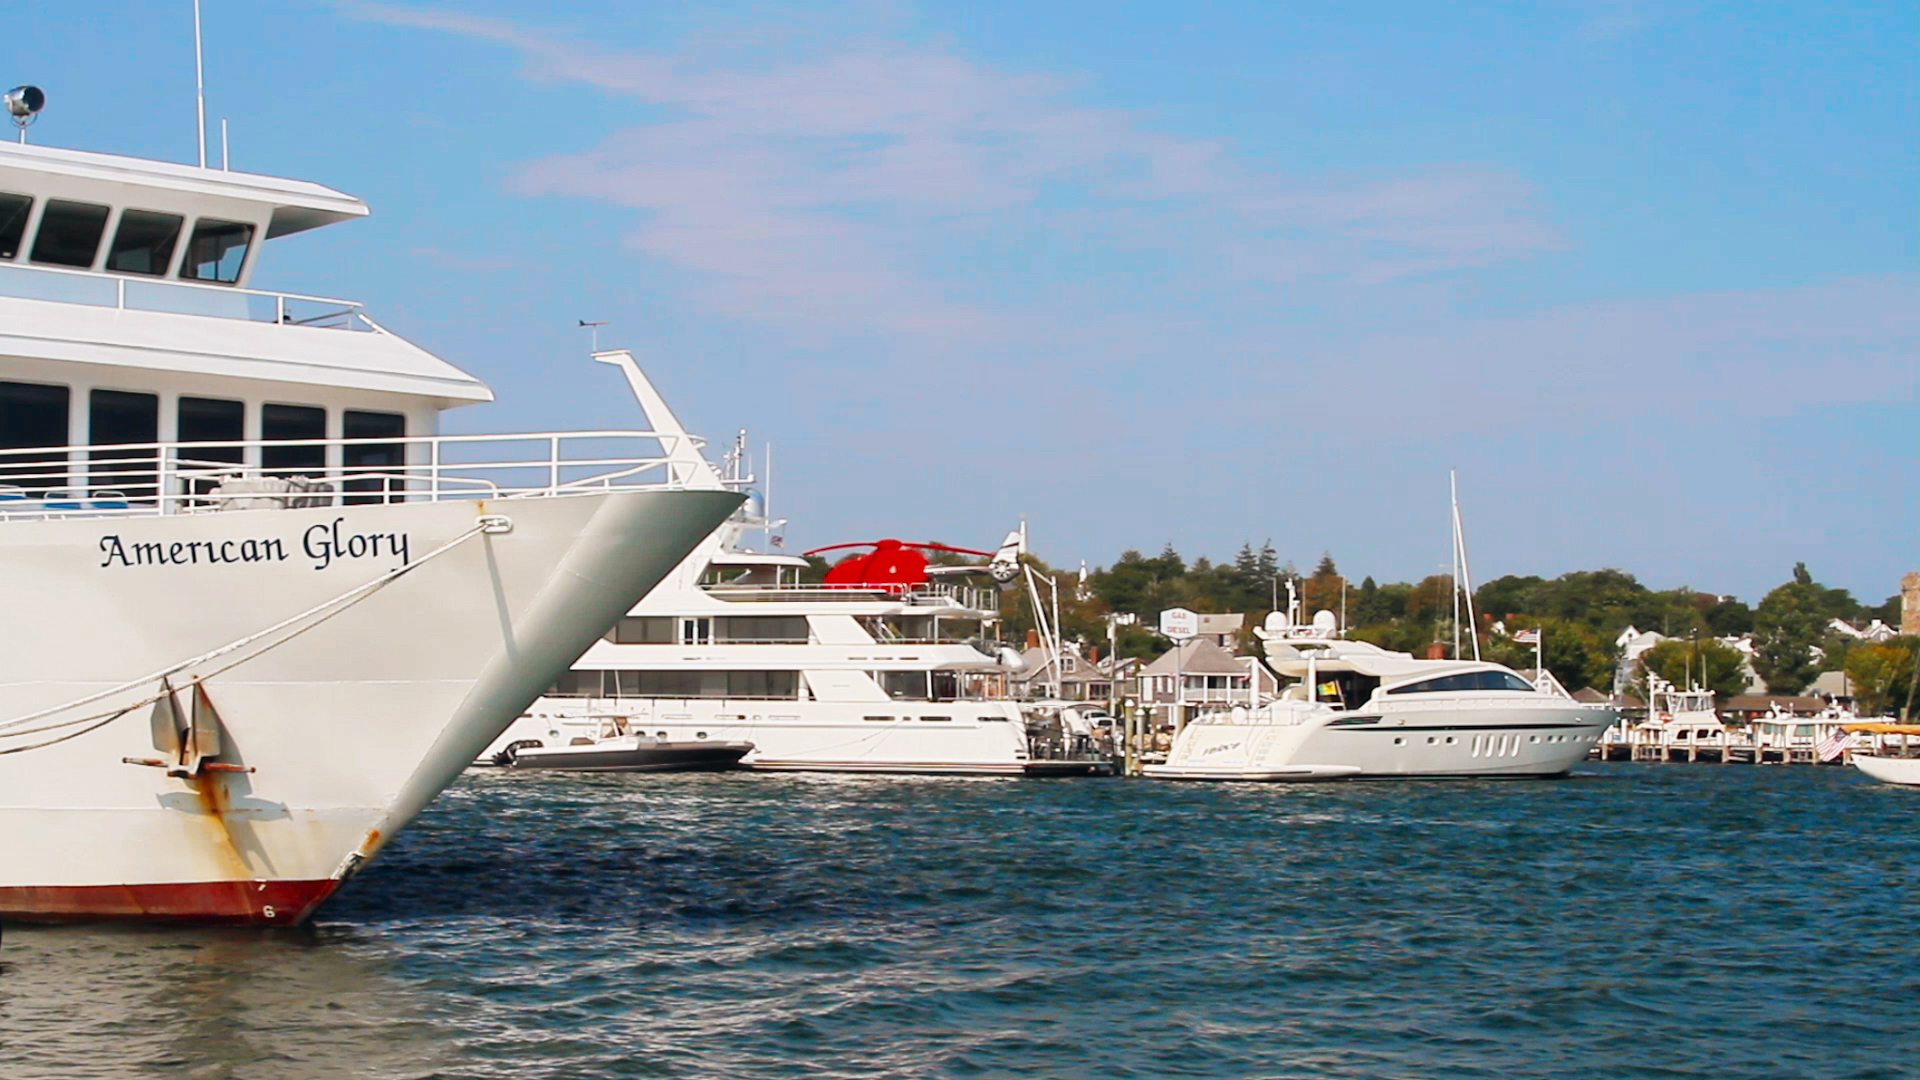 Summer on Martha's Vineyard draws the mega-wealthy with their yachts and helicopters